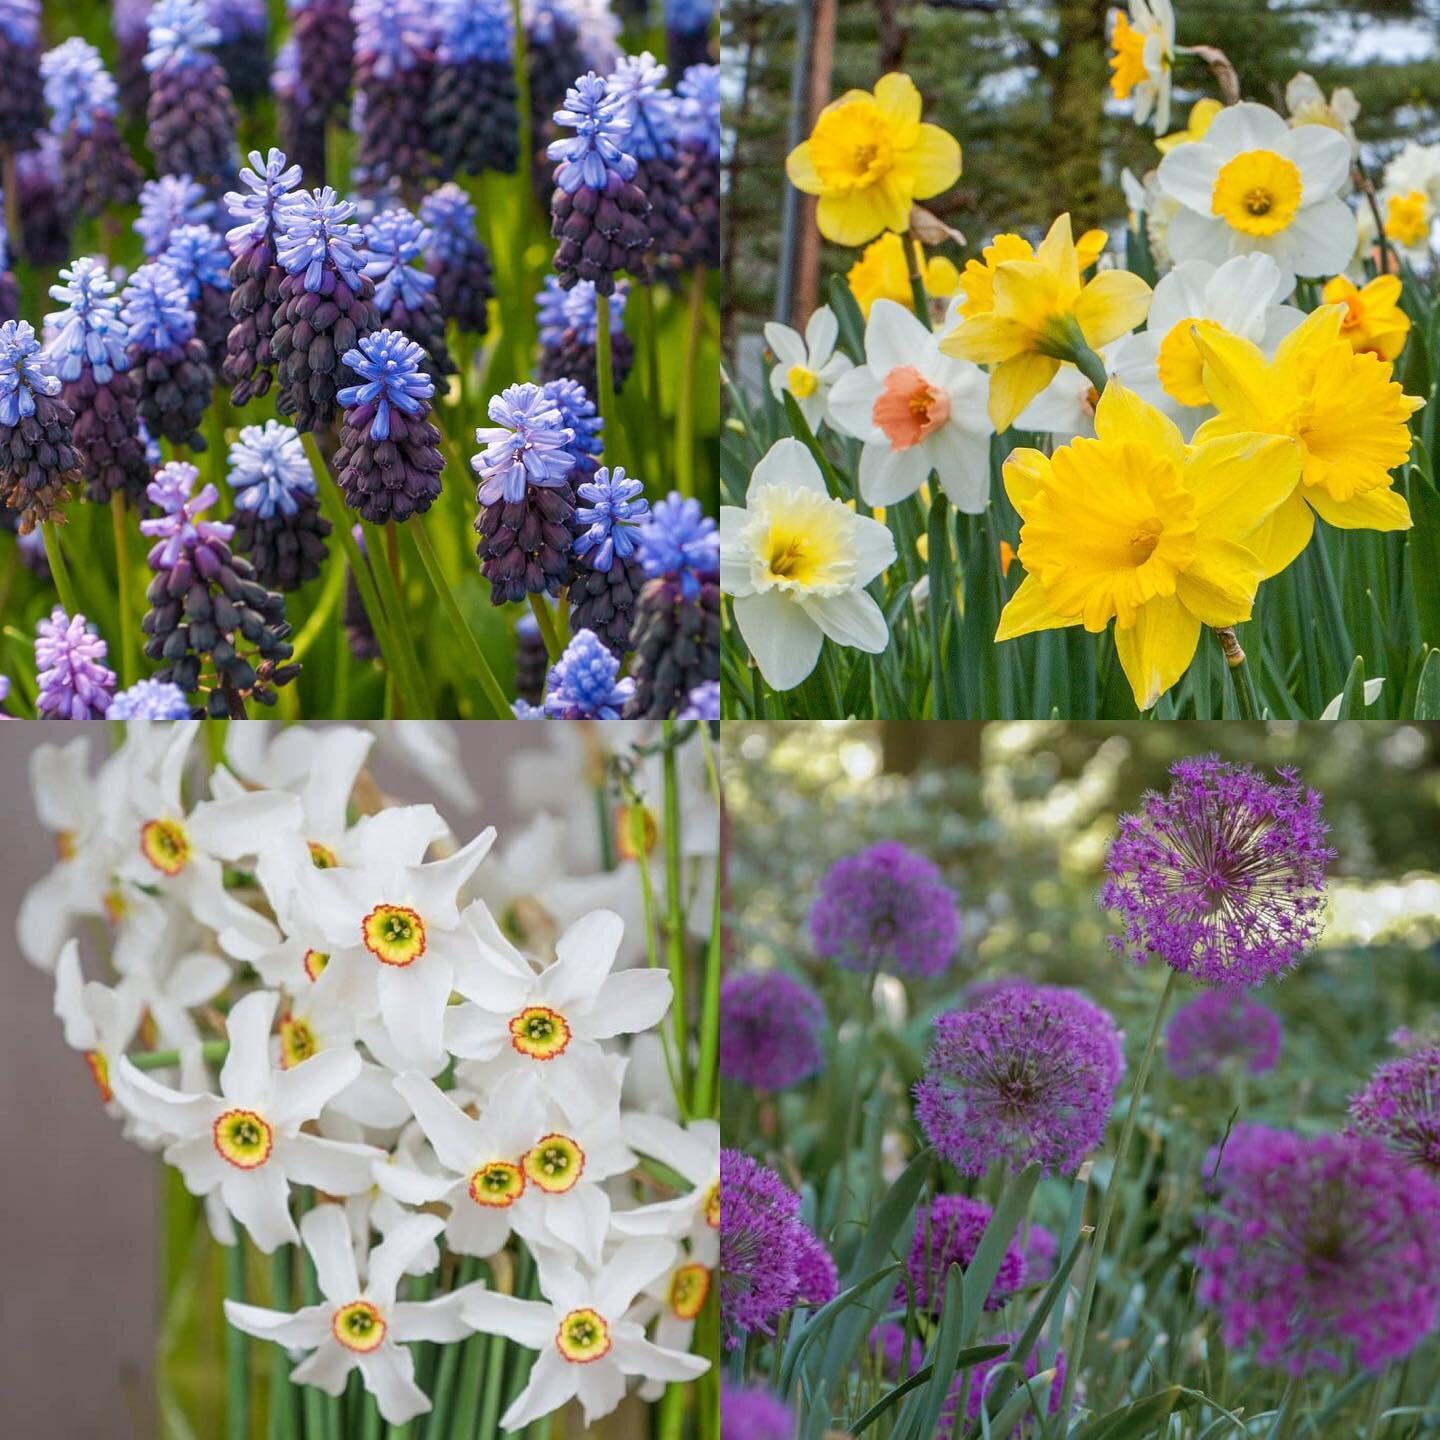 Our Bulb fund raiser has begun! Offering bulbs to plant this Fall for Spring flowers. Deer and rodent resistant. Visit https://www.gardenclubofyorktown.org/ for details.